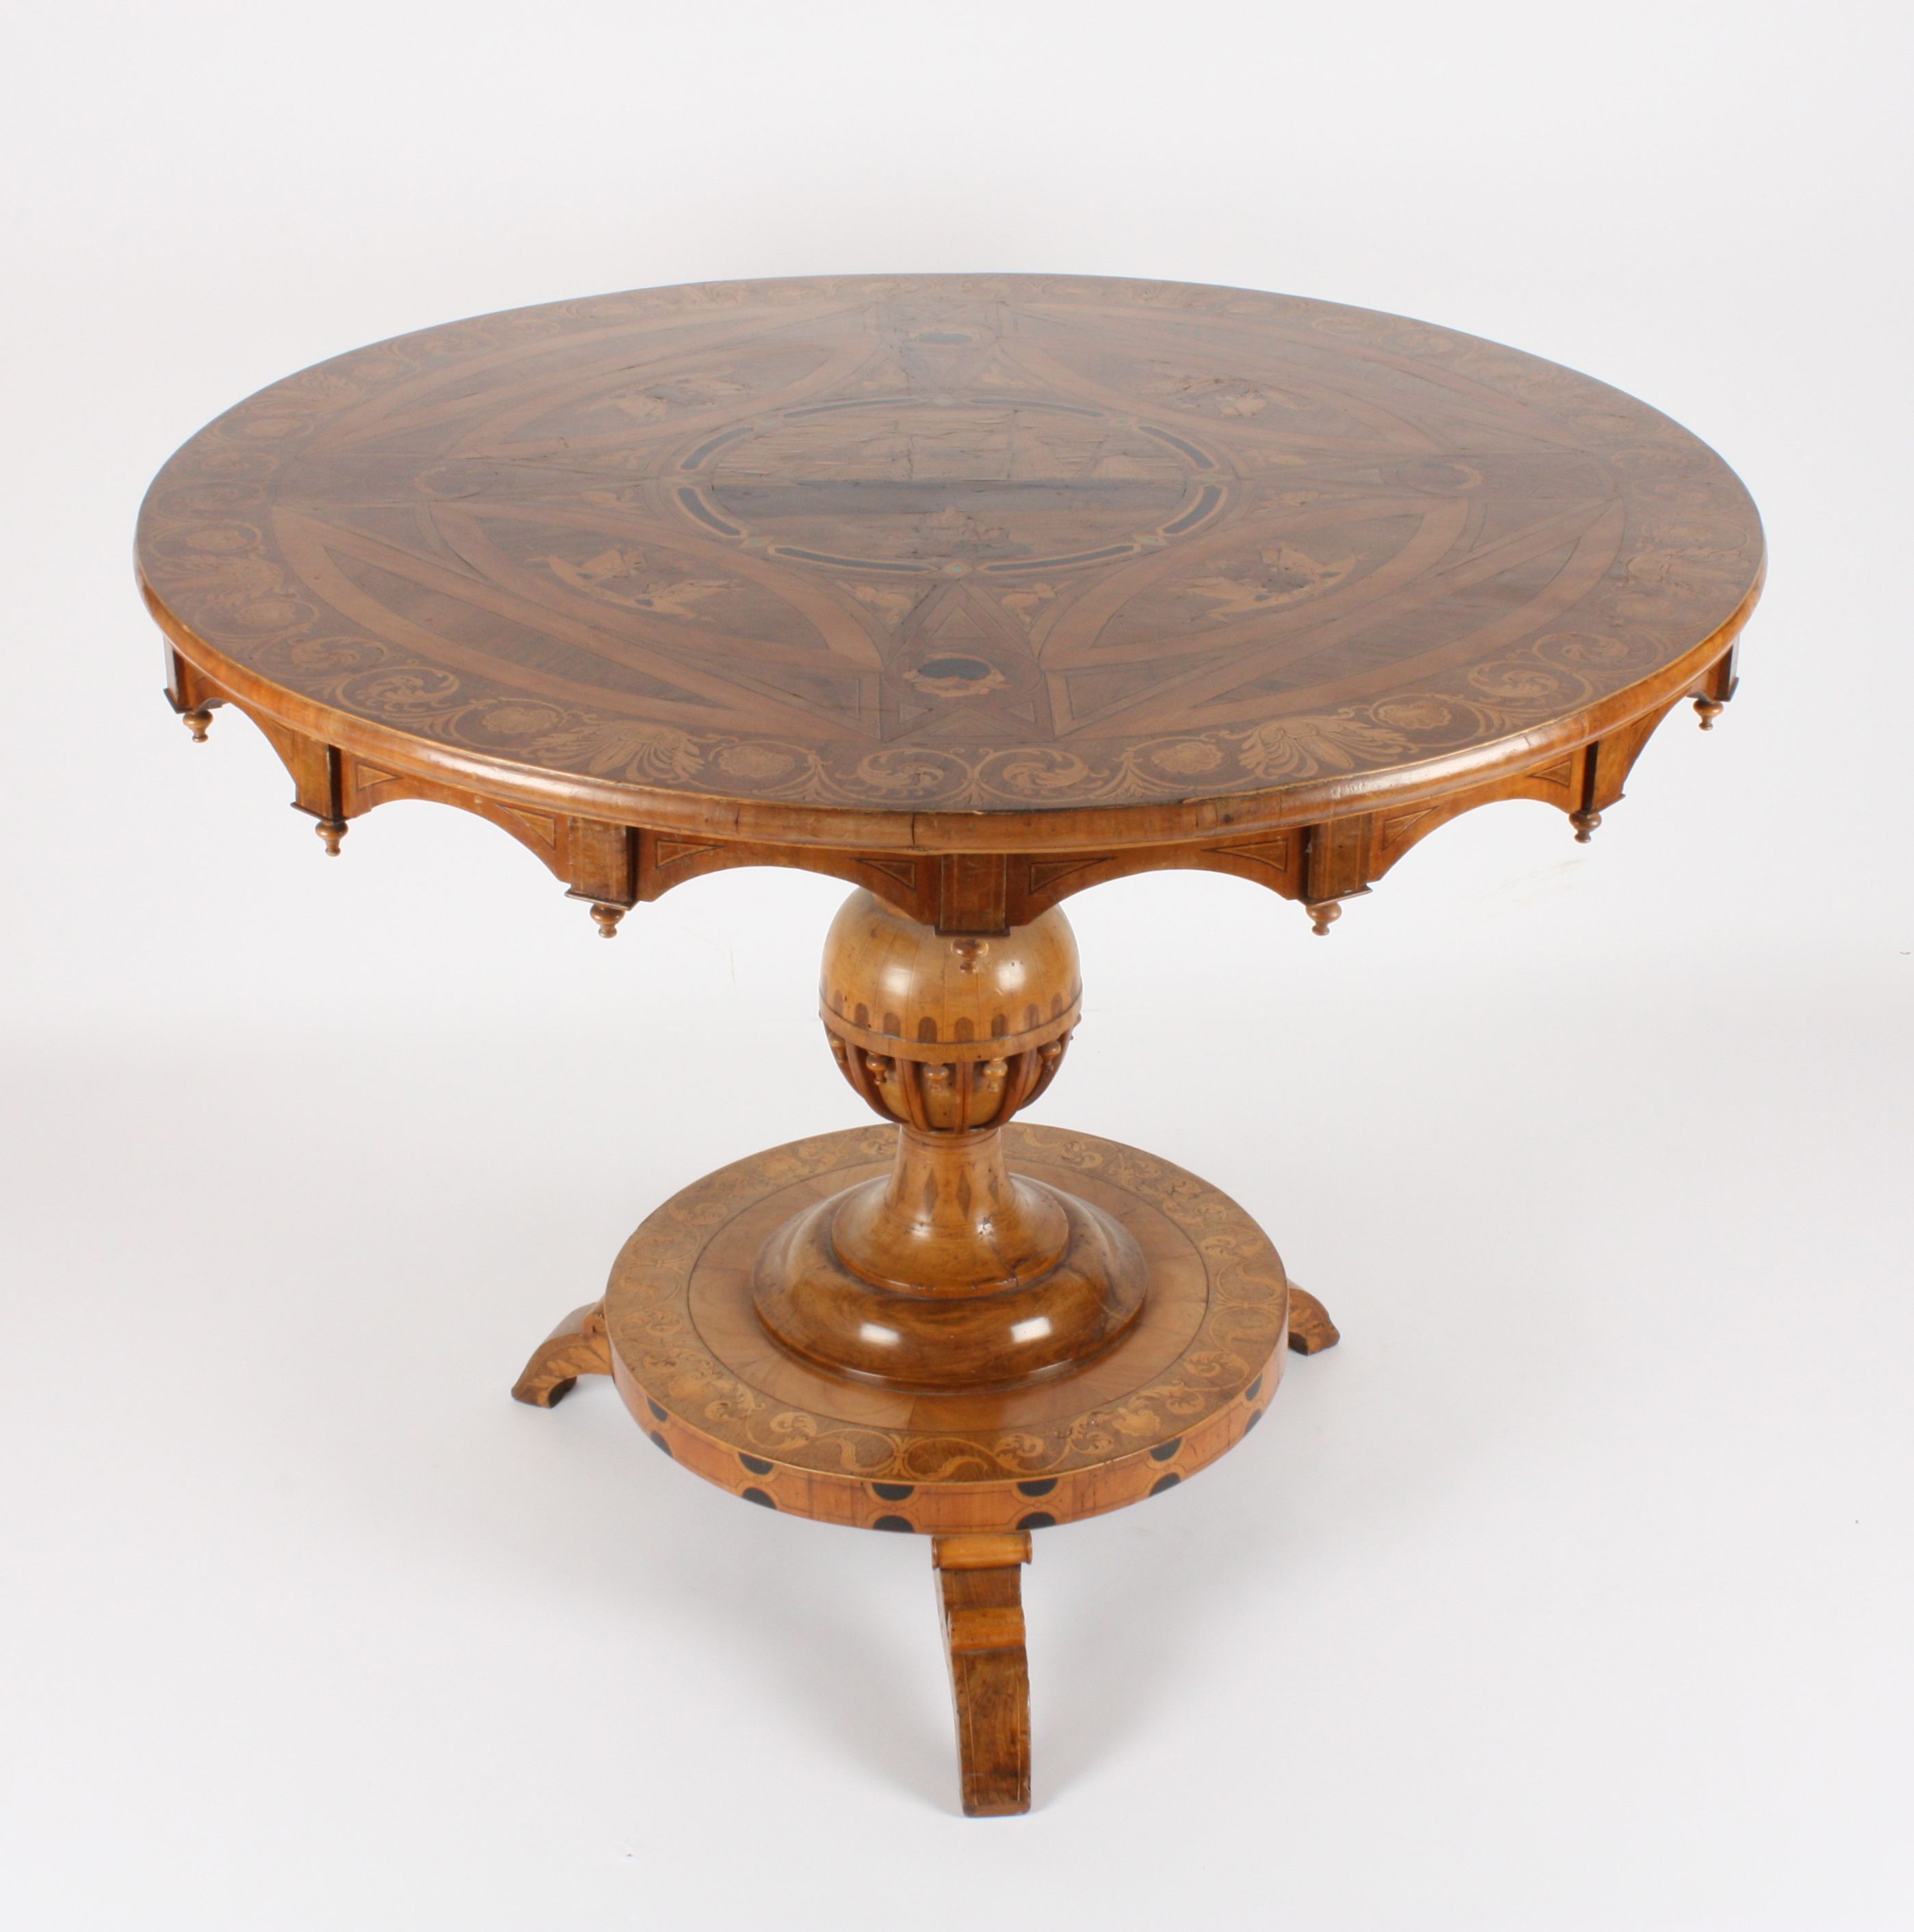 A good 19th century walnut marquetry tilt-top centre table with maritime interest
the centre